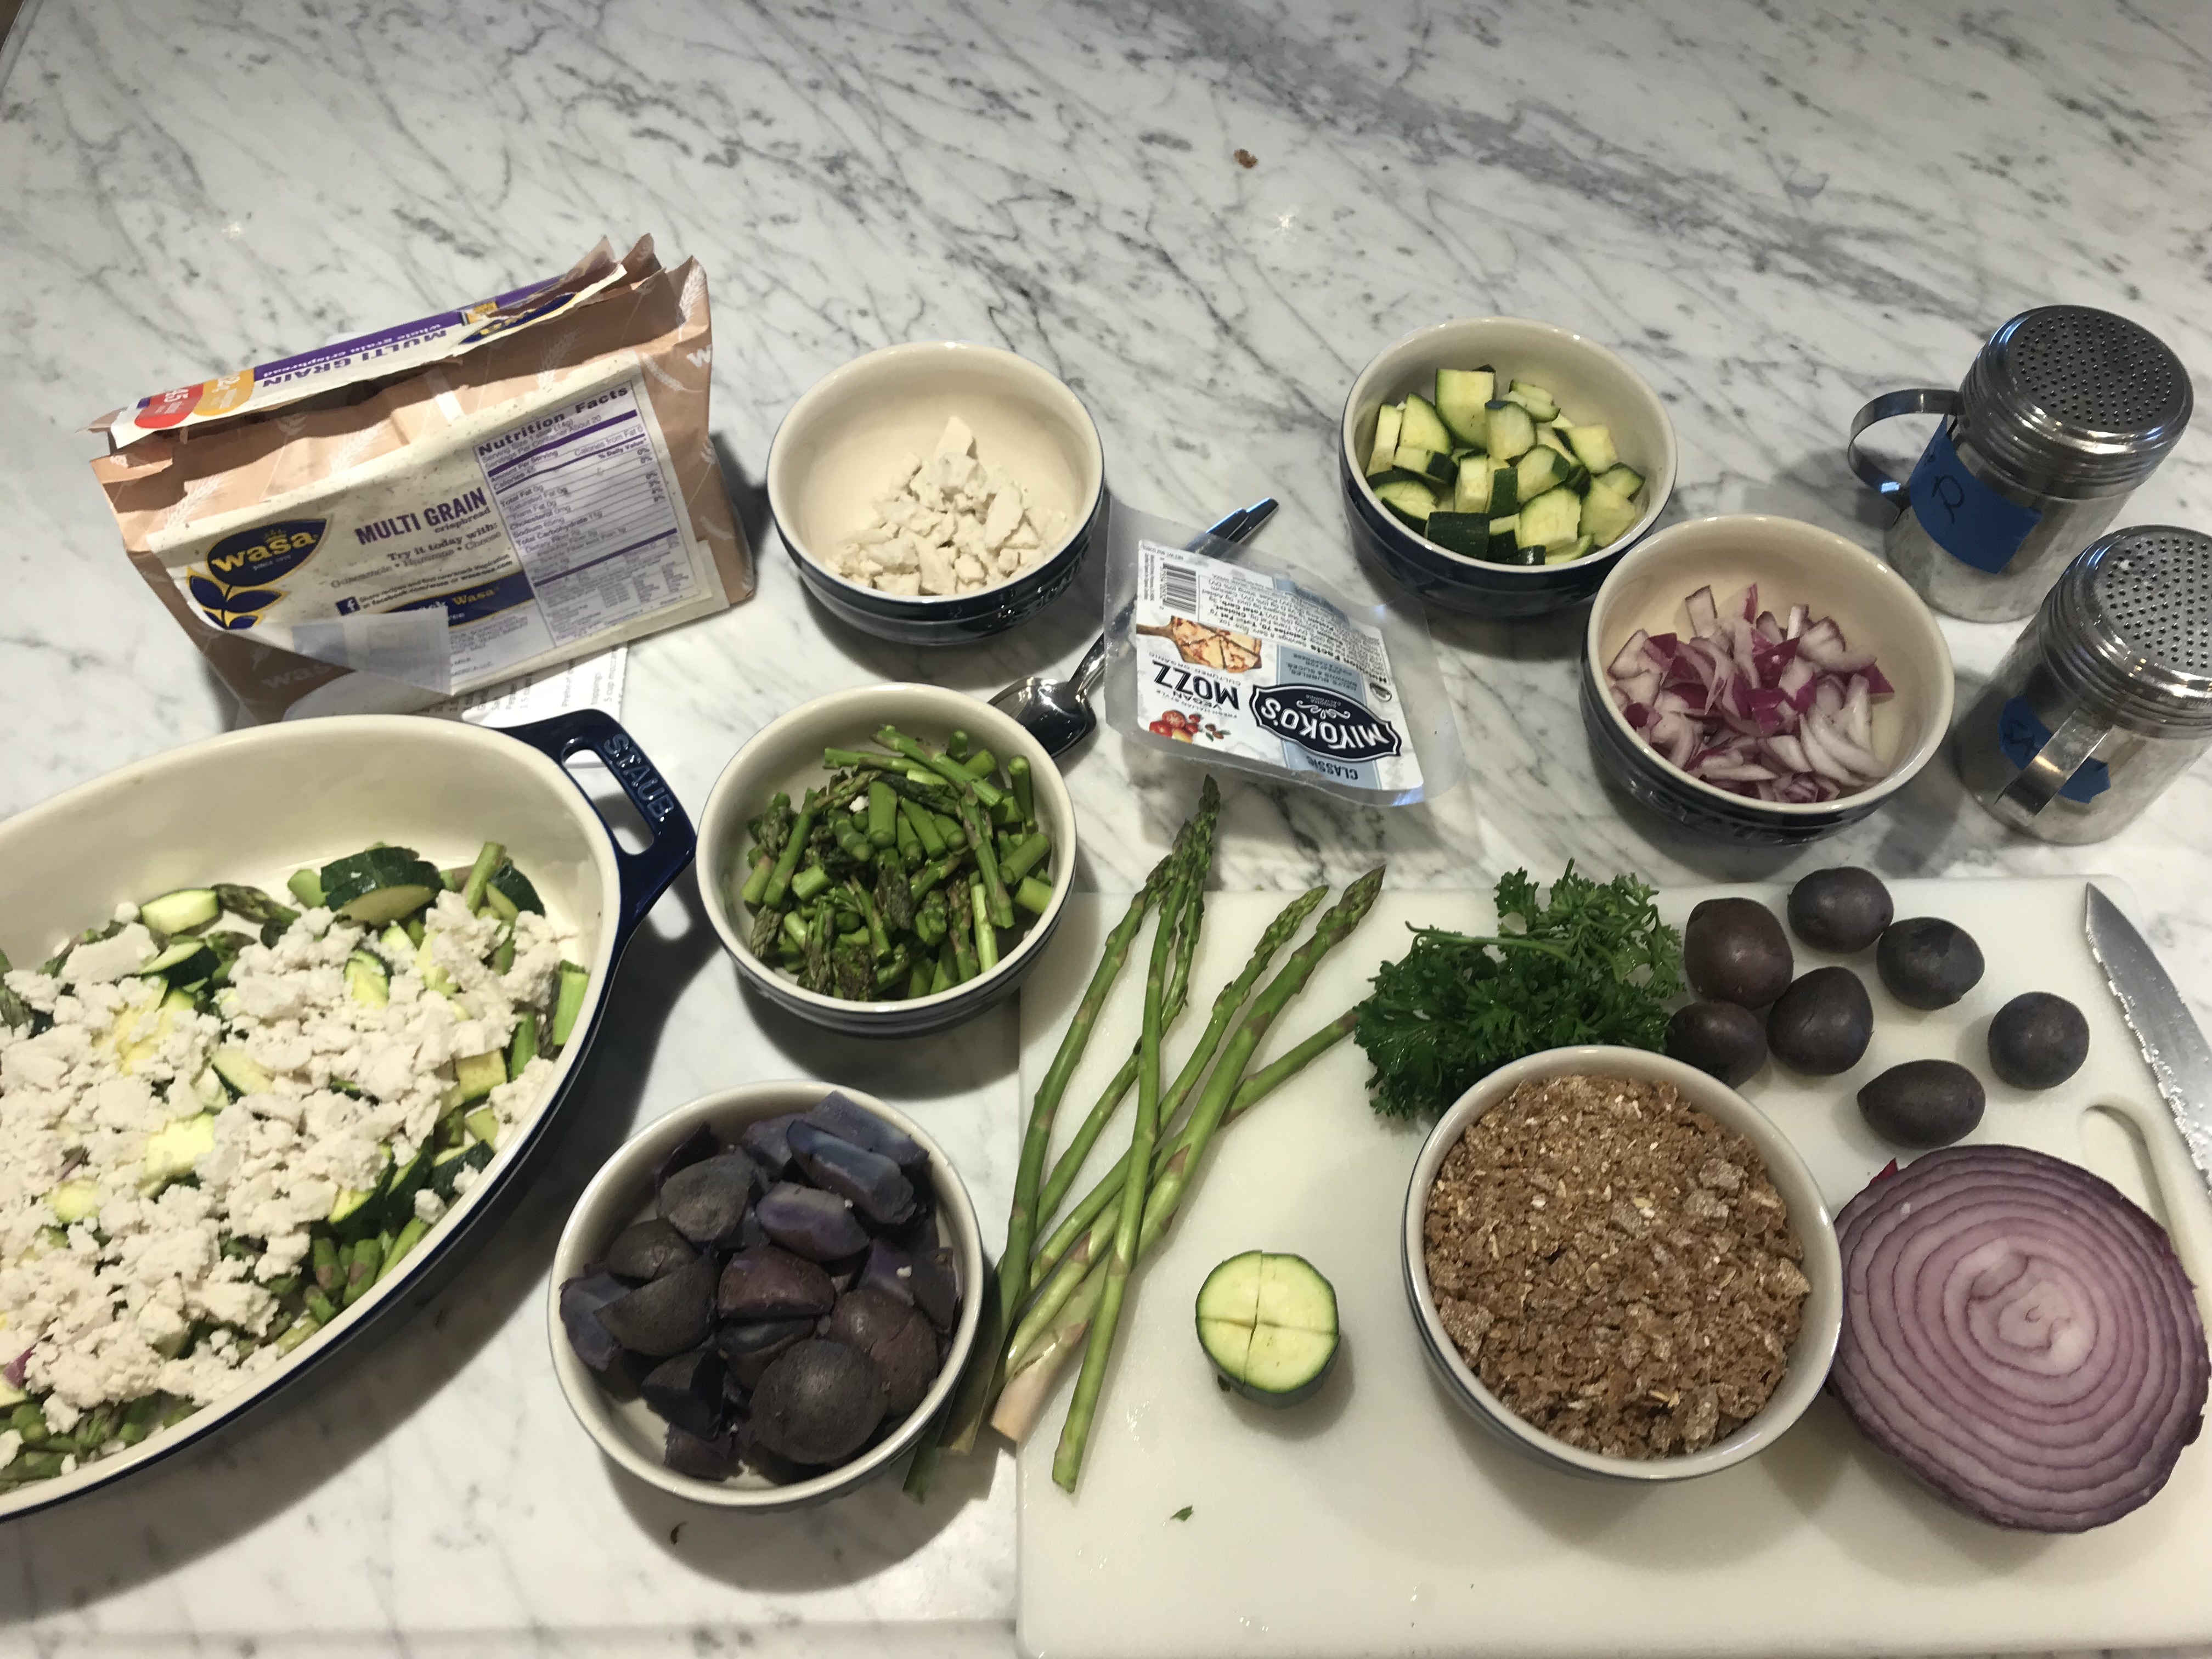 Ingredients for Asparagus, Purple Potato, Zucchini Casserole by Elysabeth Alfano Awesome Vegans